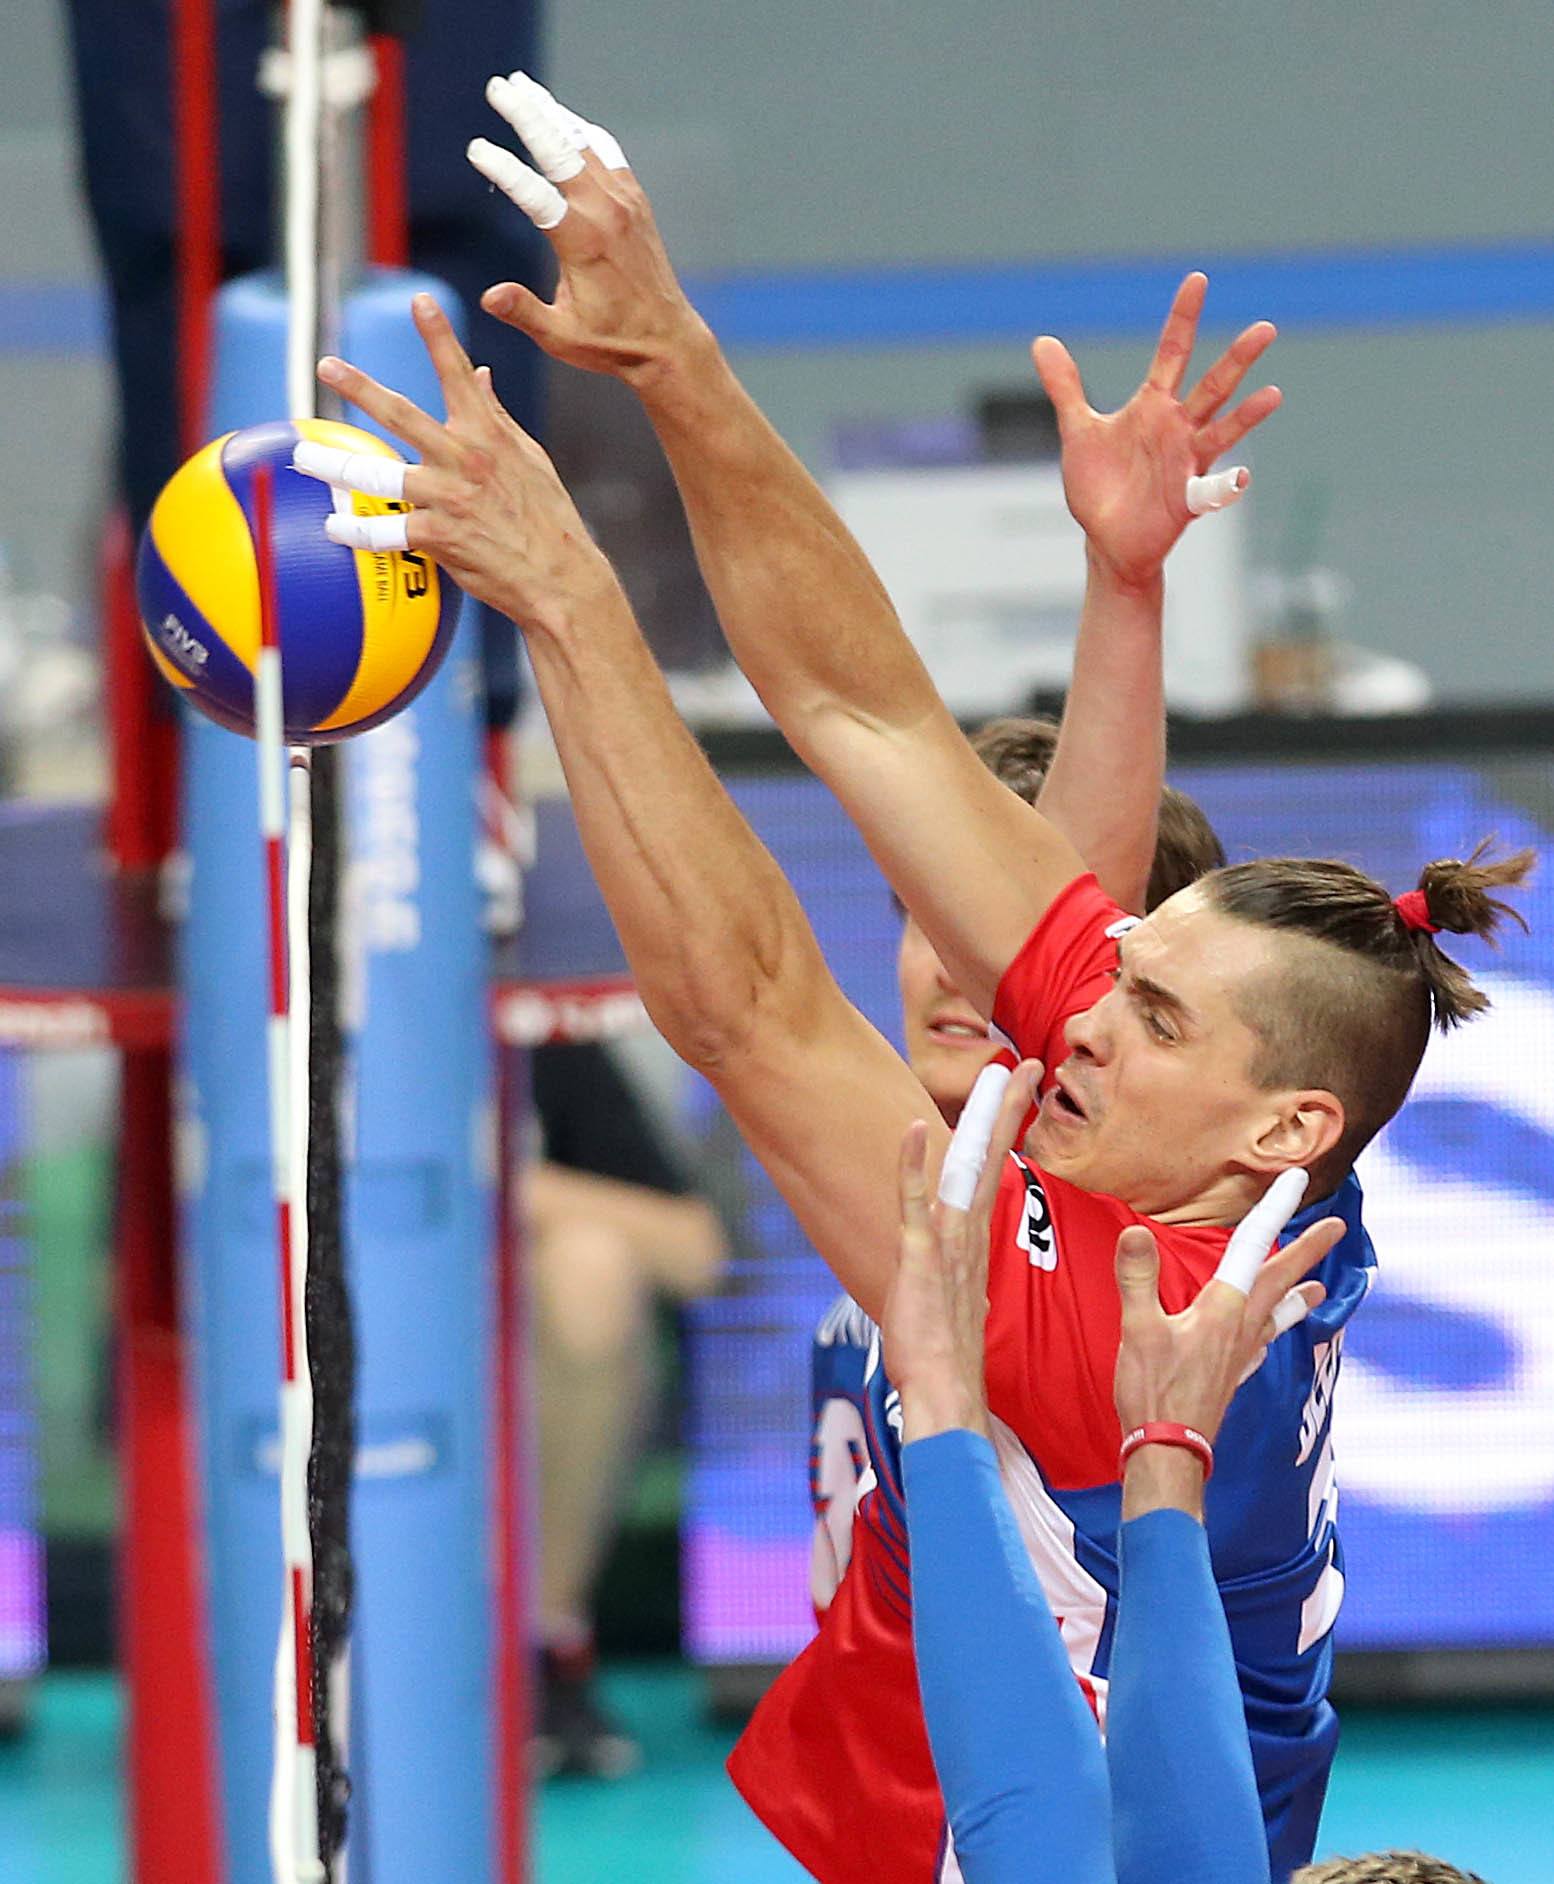 Turkey Struggles From Service Line in Friendly Loss to Czechs